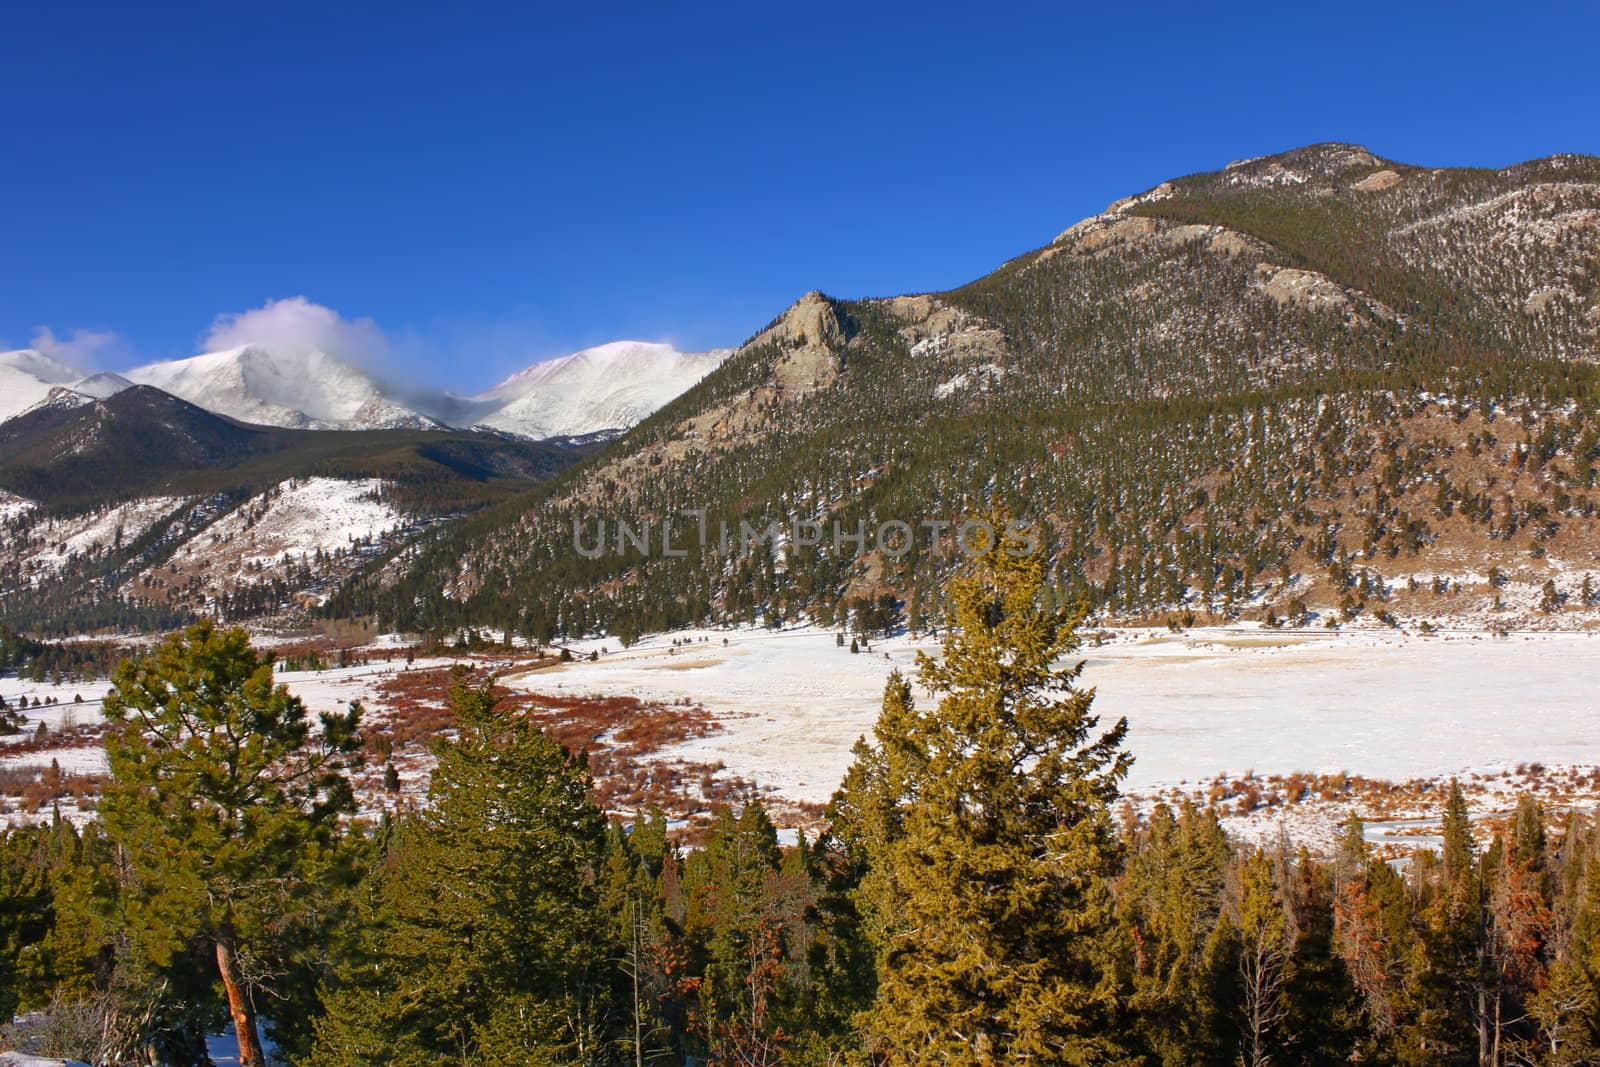 Winter Scenery of Rocky Mountain National Park in Colorado.